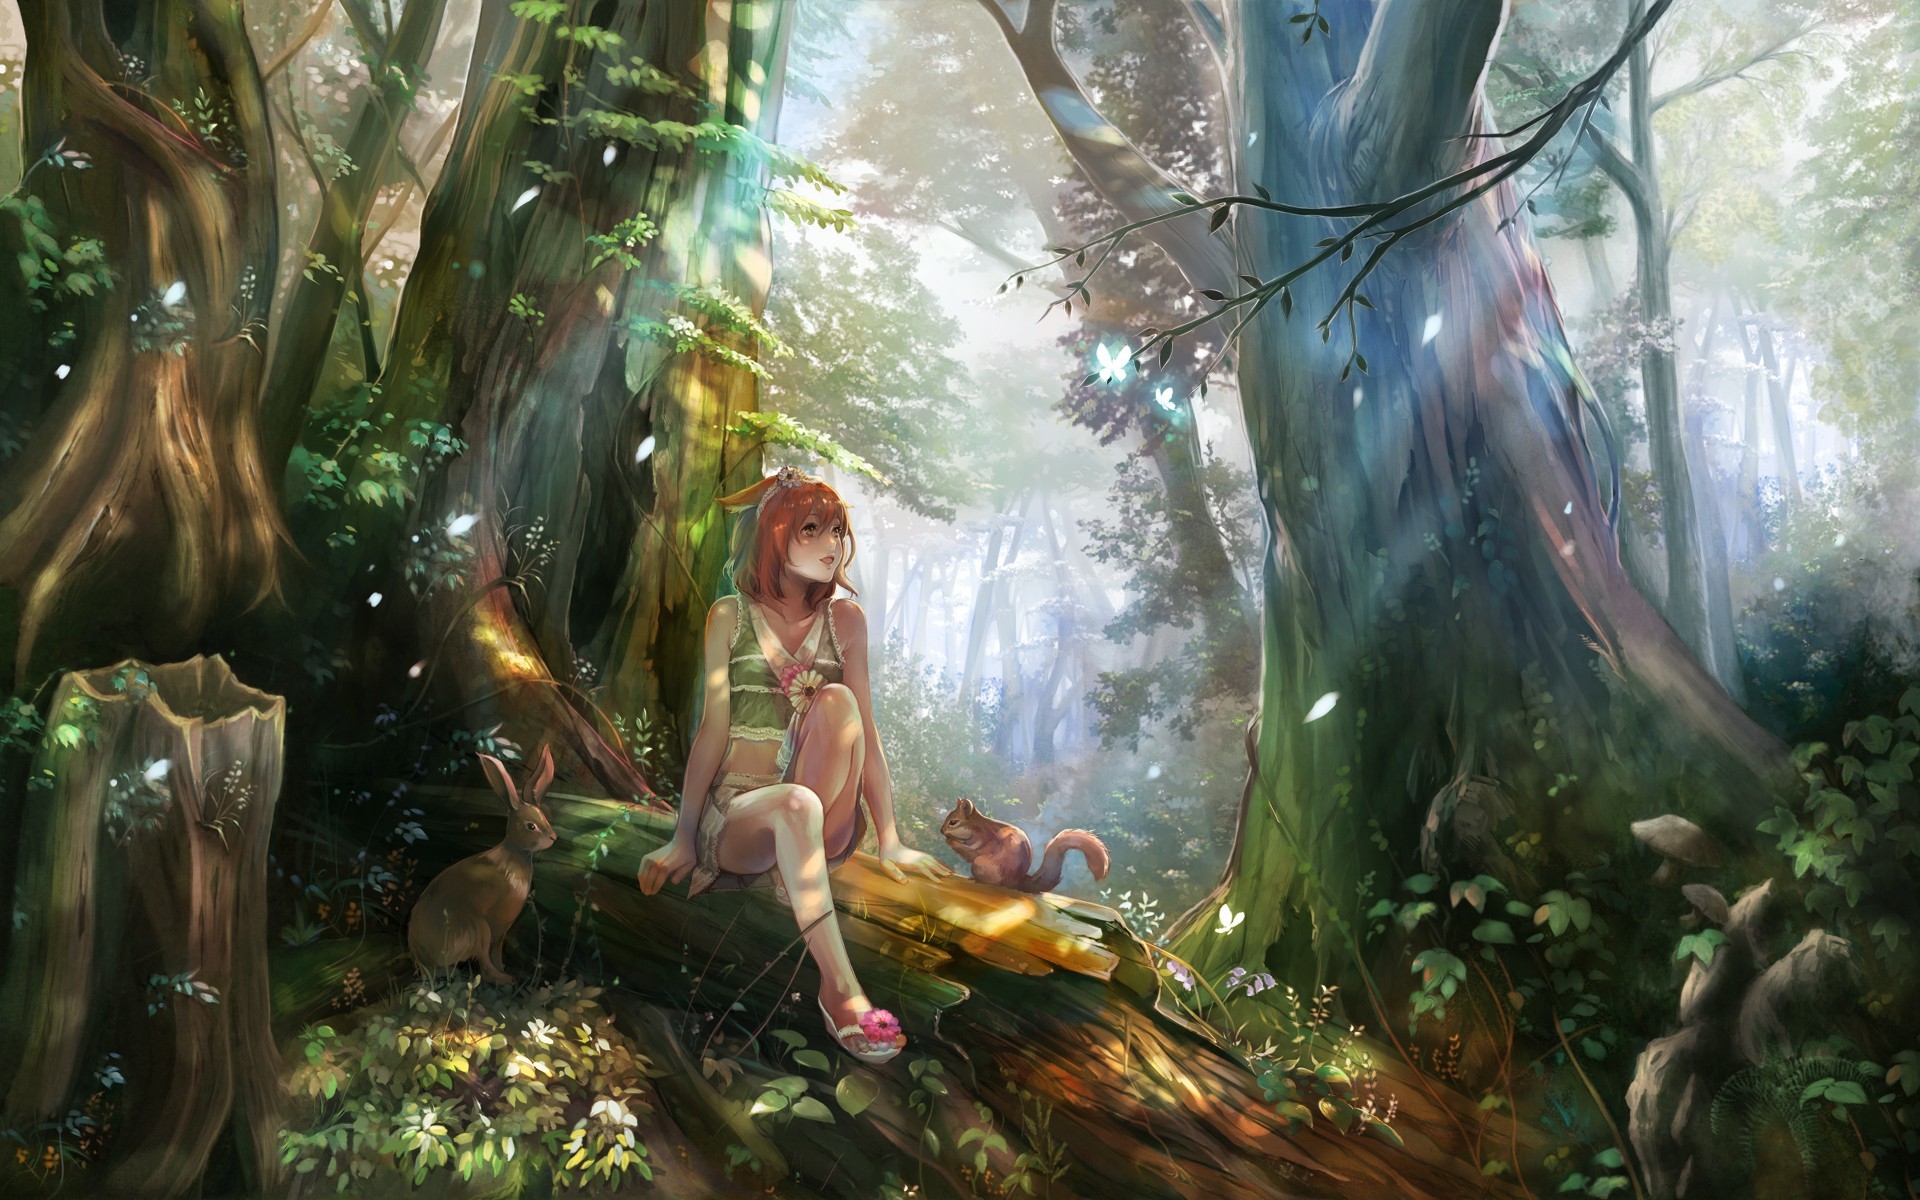 anime Girls, Forest, Nature, Fantasy Art, Forest Clearing, Elves